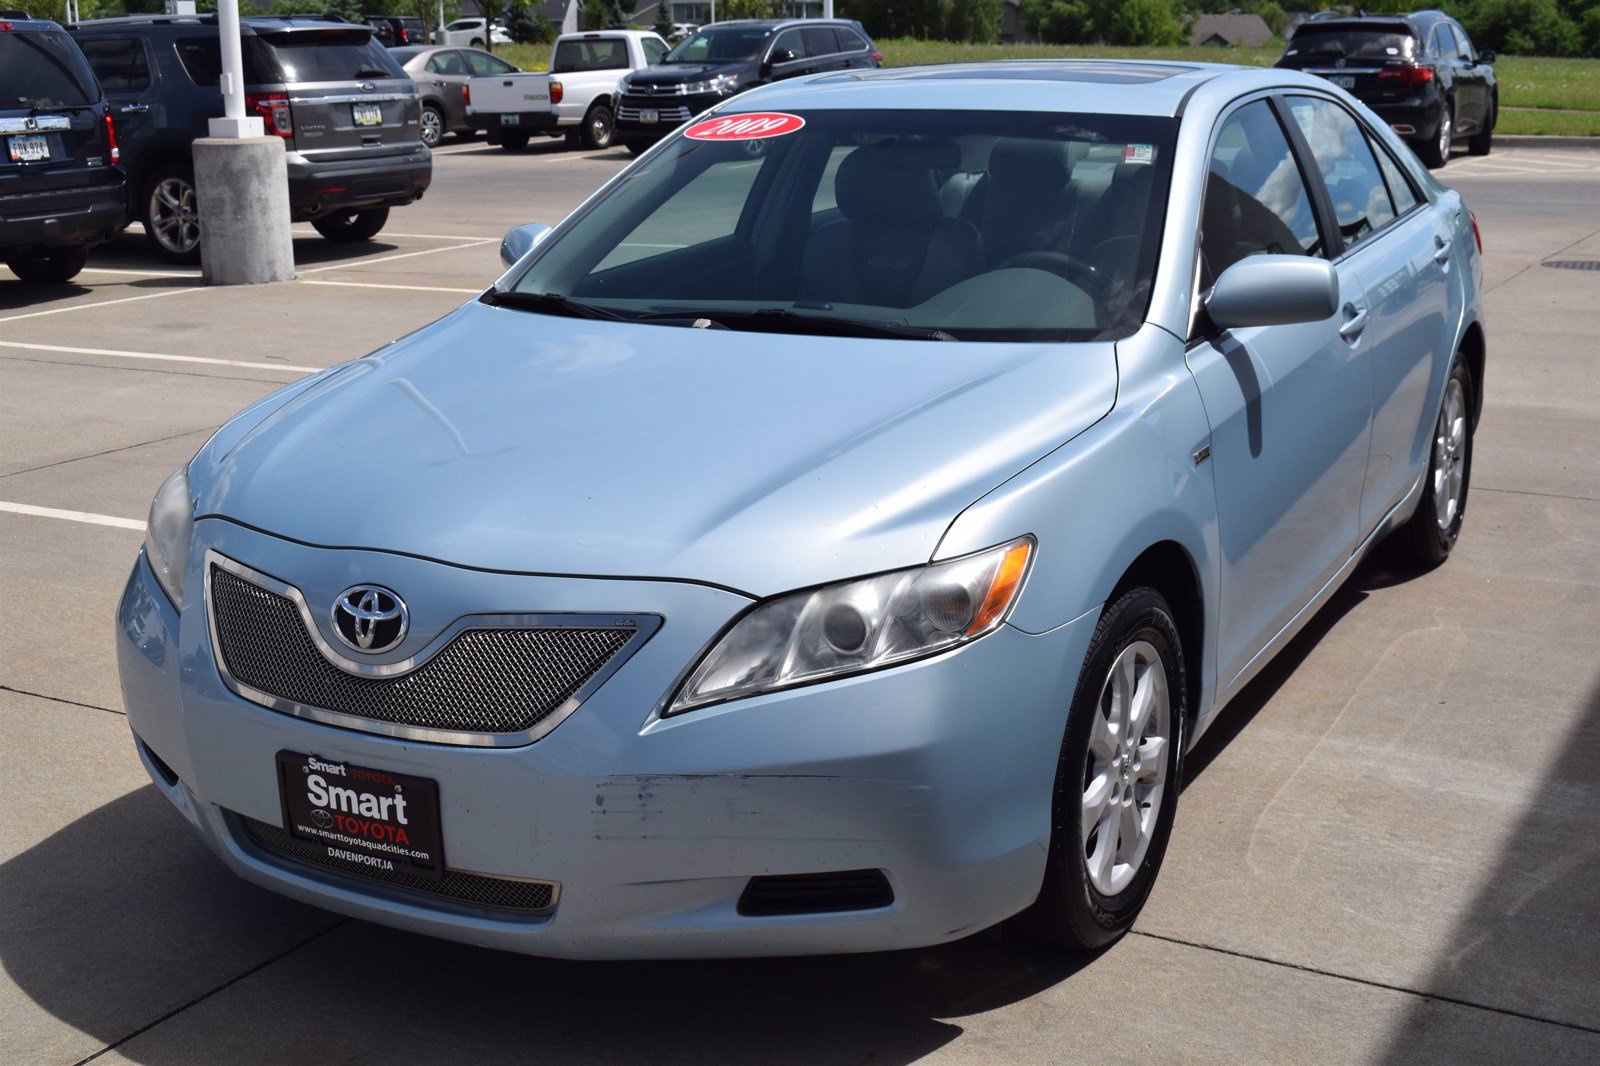 Pre-Owned 2009 Toyota Camry LE 4dr Car in Davenport #23335B | Smart ...